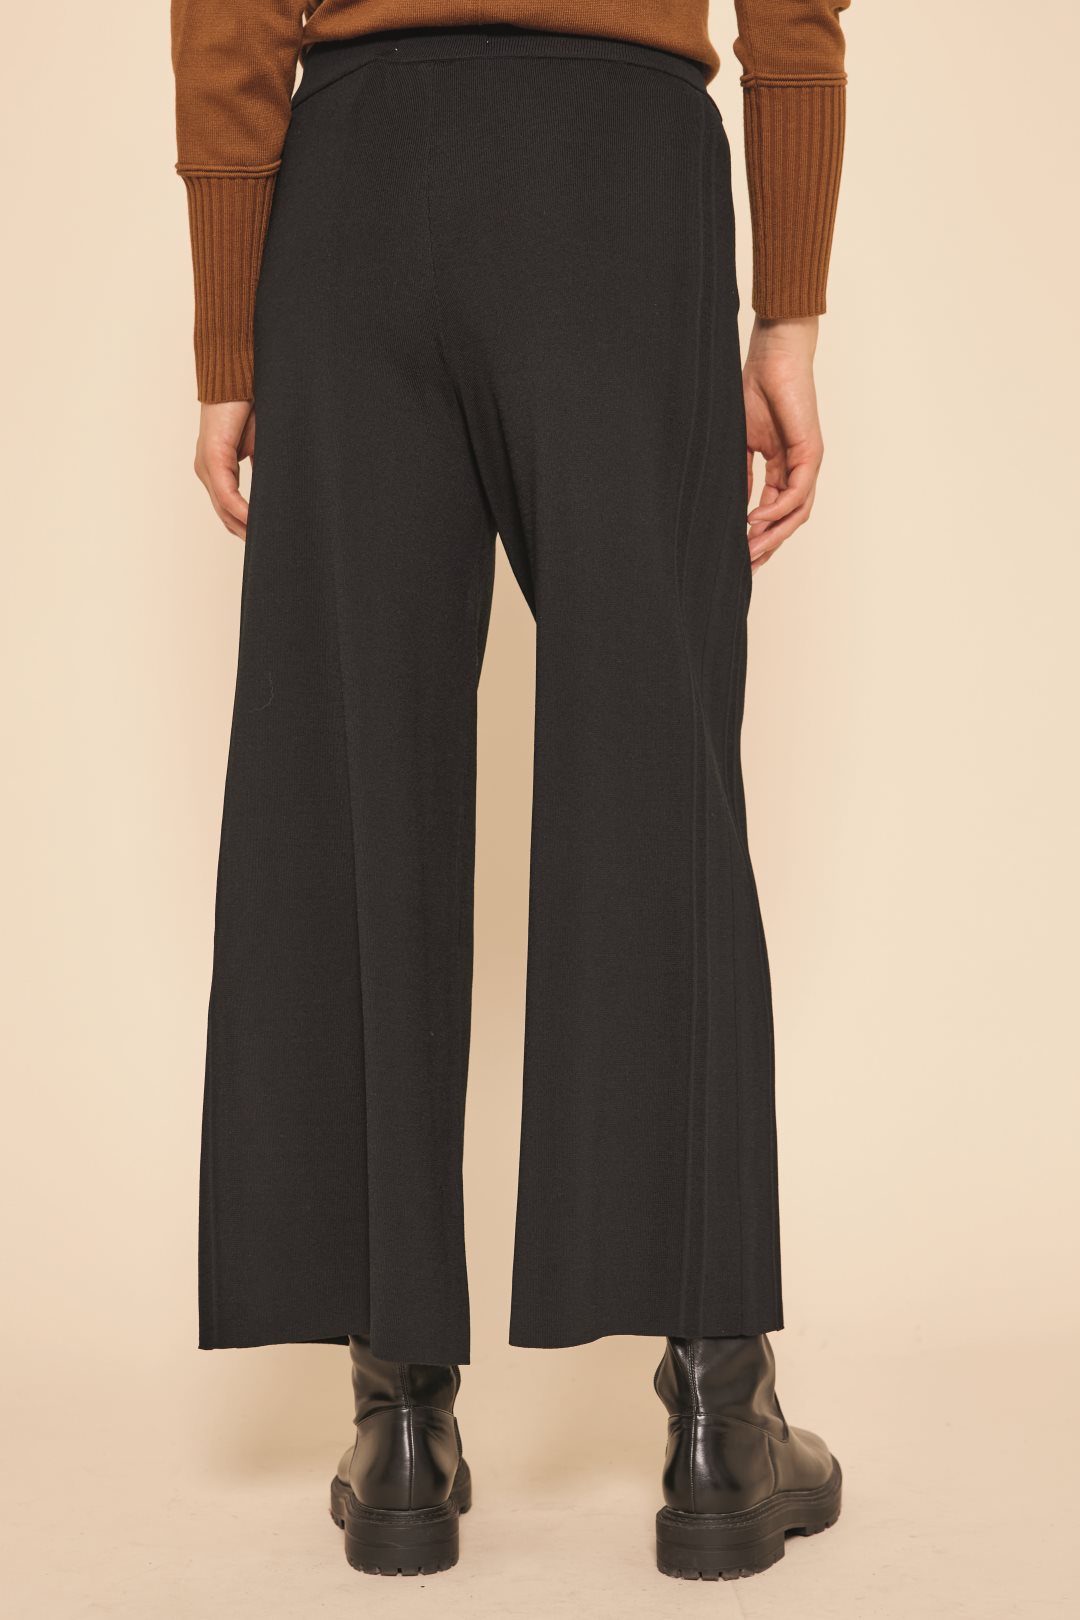 Riviera trousers